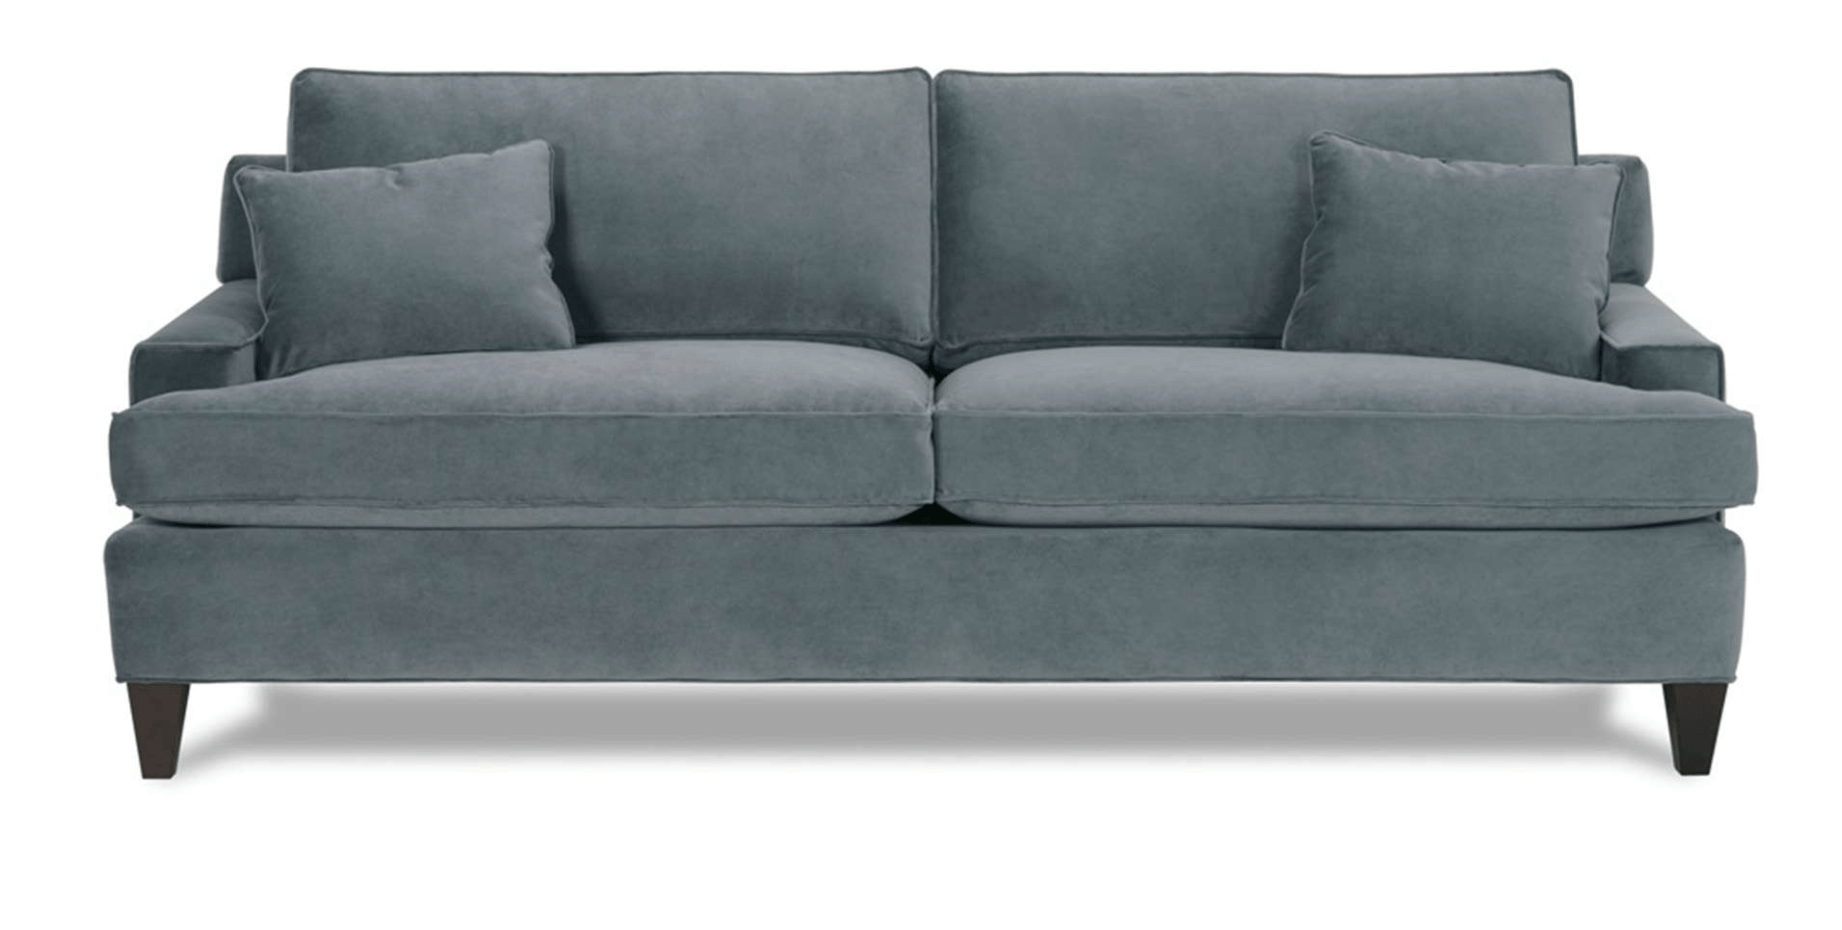 a blue couch with two pillows on it on a white background